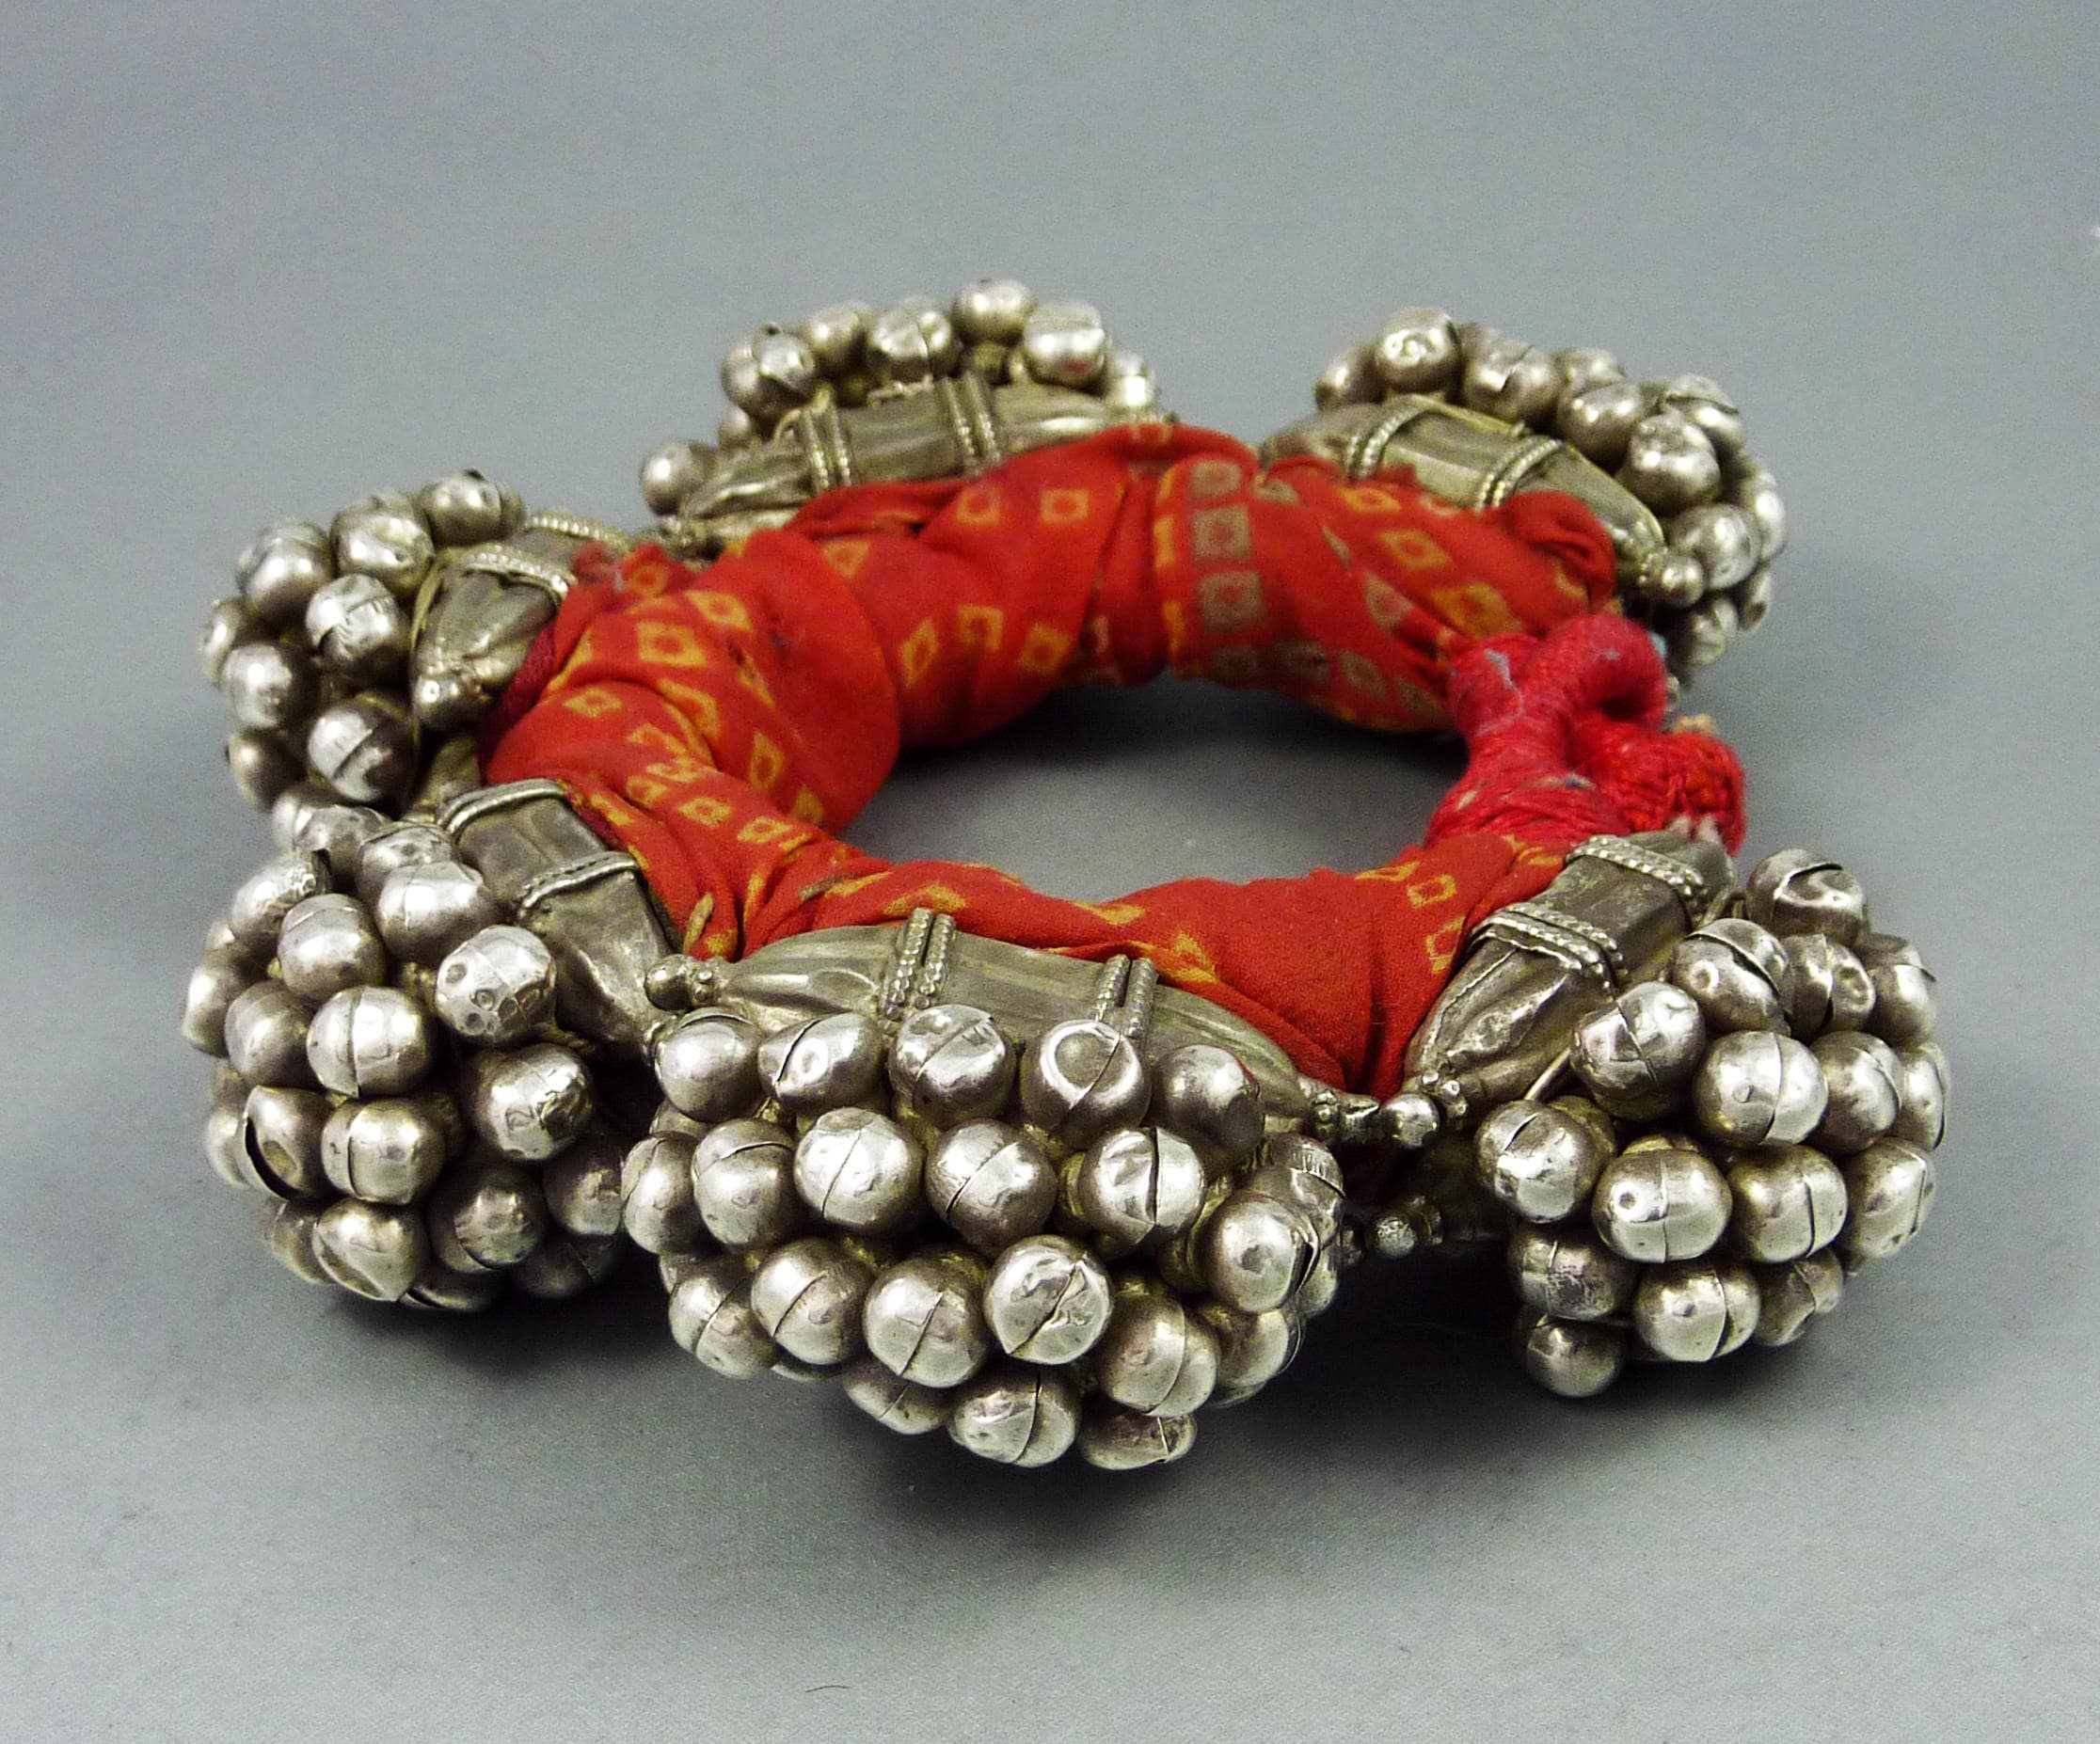 Buy Online The Handmade Rajasthani Lac Bangles with Diamond Work From  Panchayat Udsar